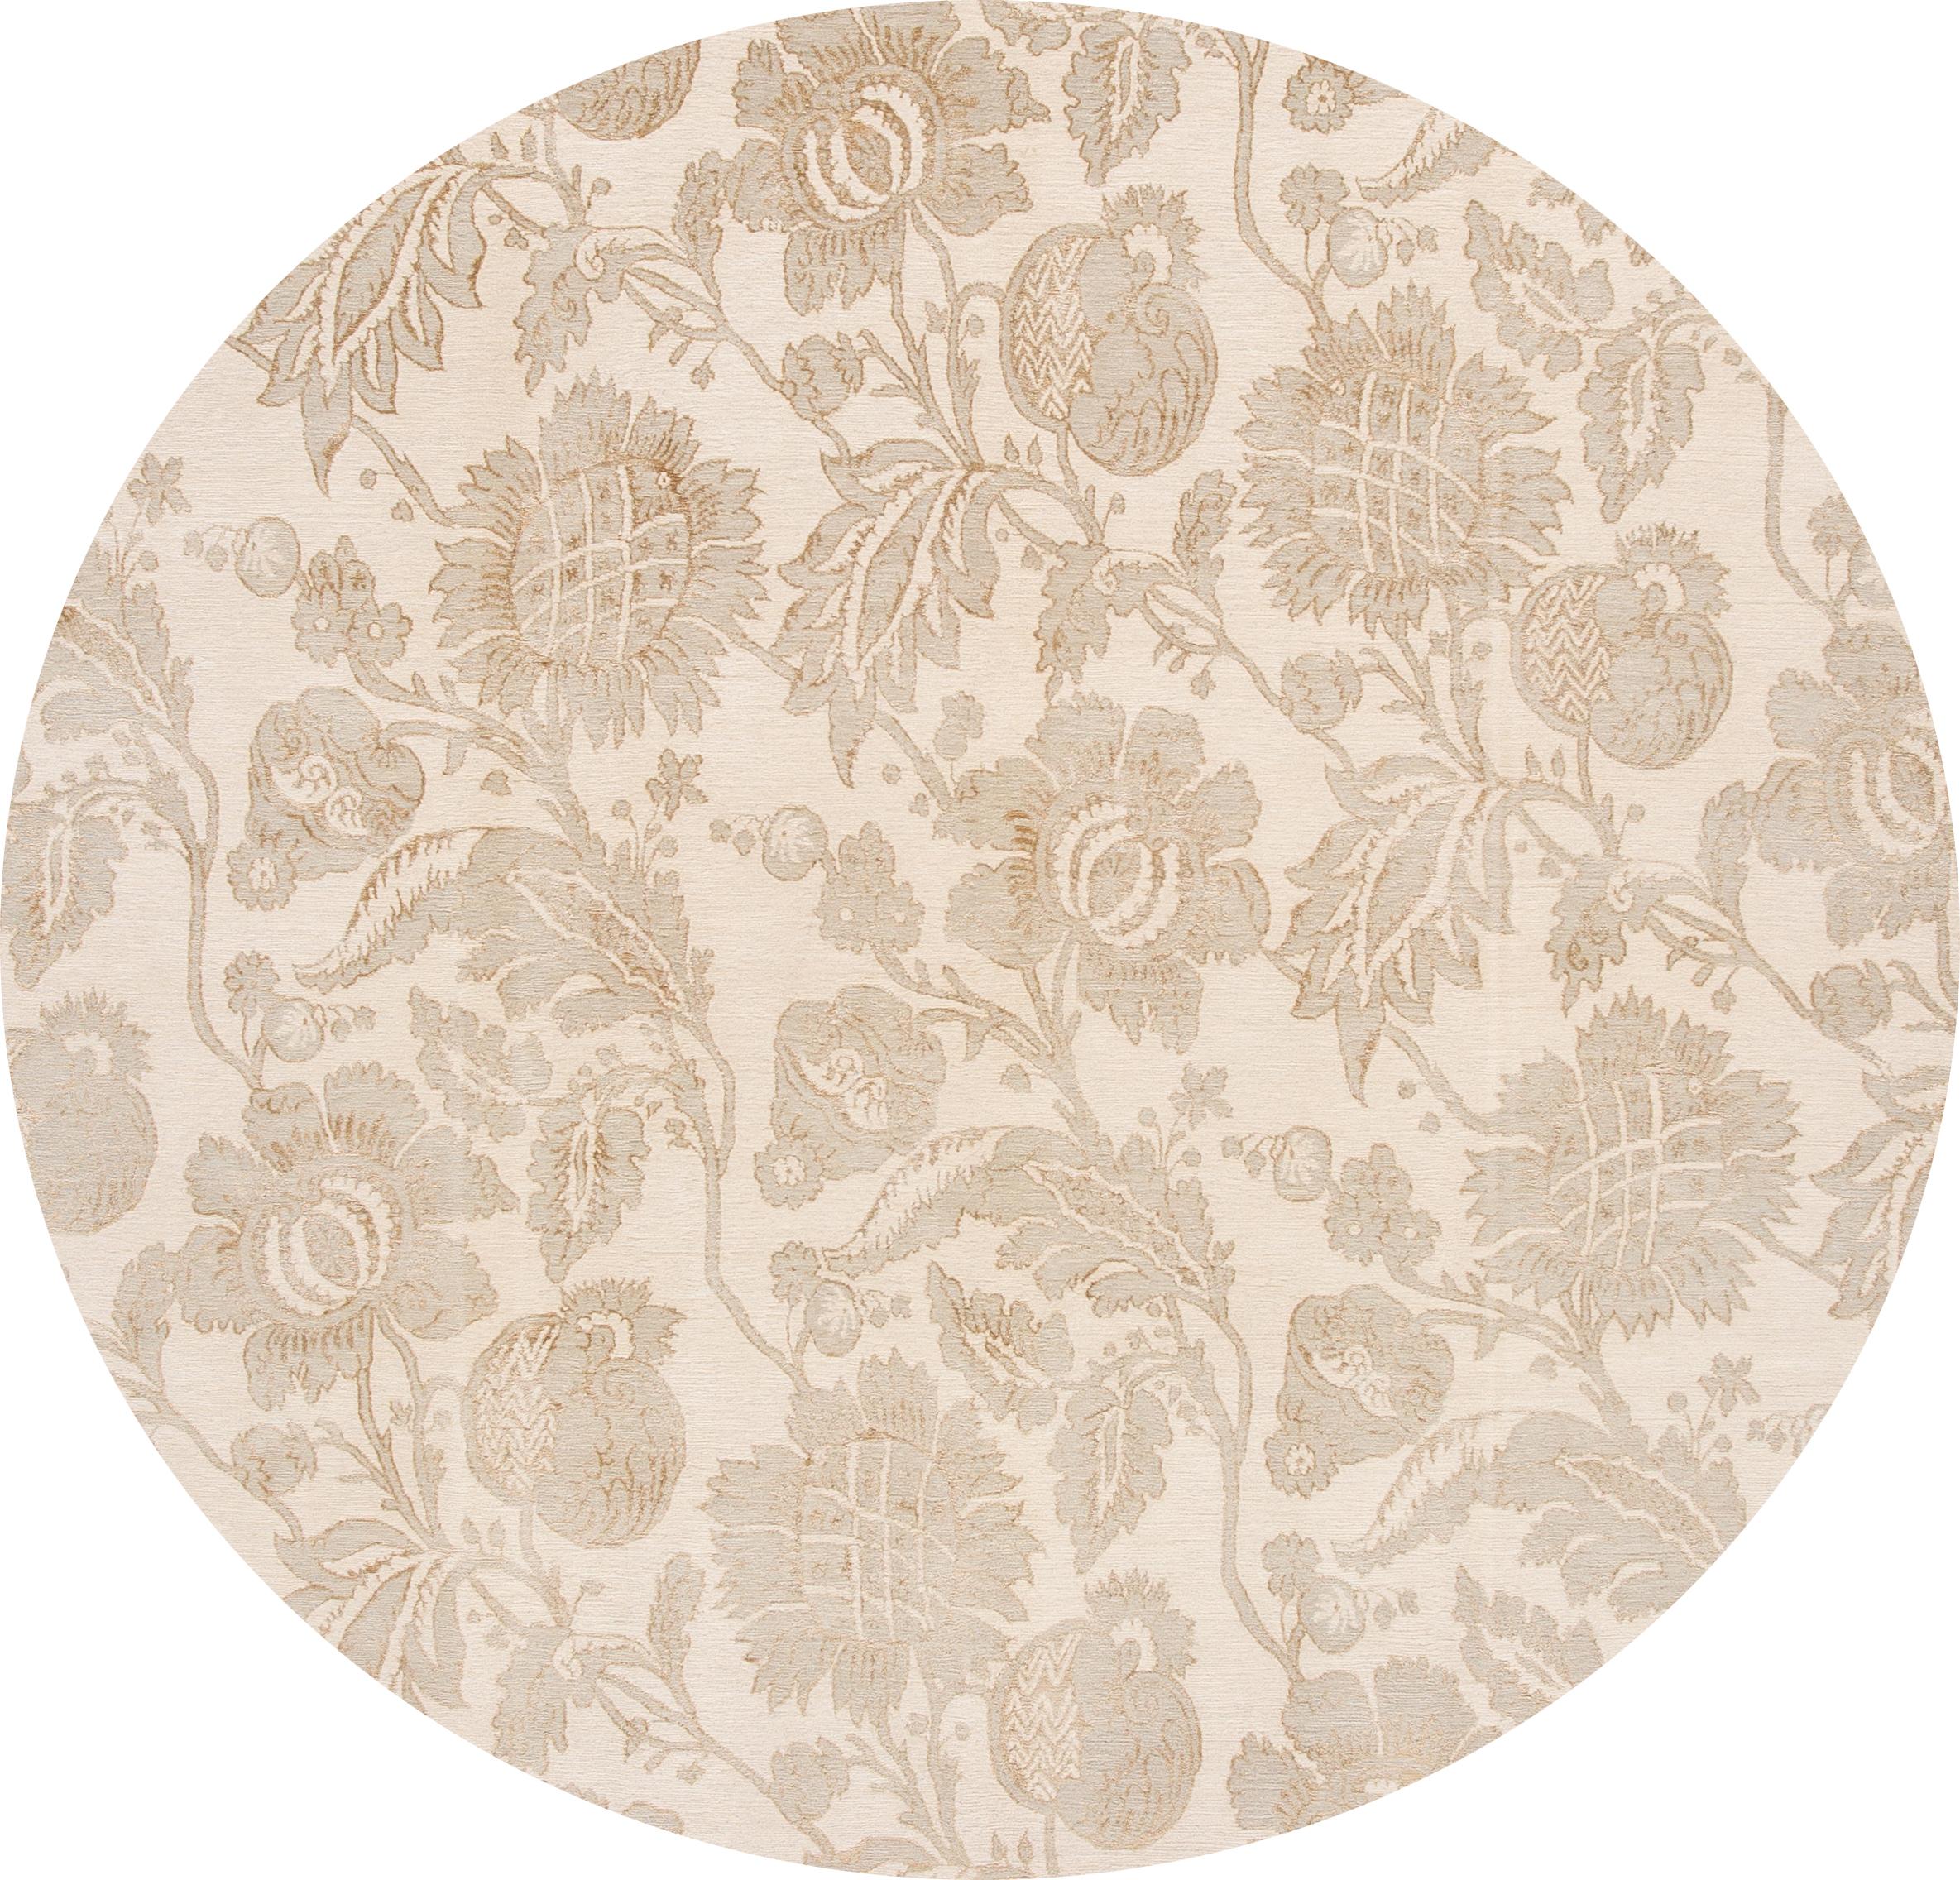 21st century contemporary Nepalese Lapchi rug, blend of wool, and silk, with an ivory field. Accents of beige on a floral design.
This rug measures: 8' x 10'1”.
 